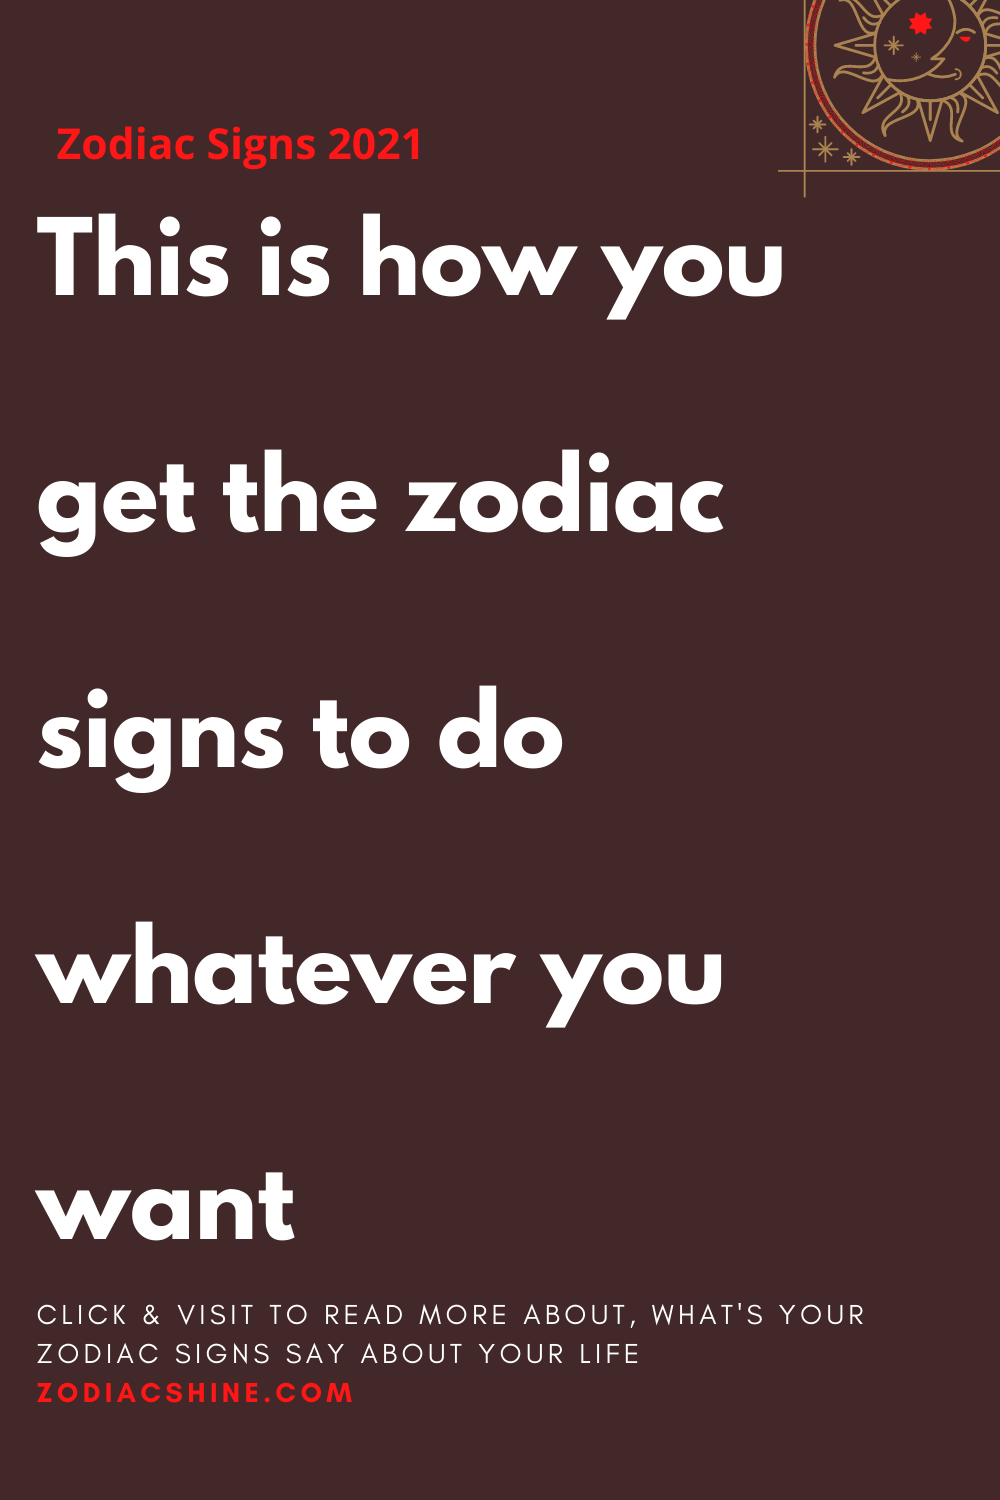 This is how you get the zodiac signs to do whatever you want